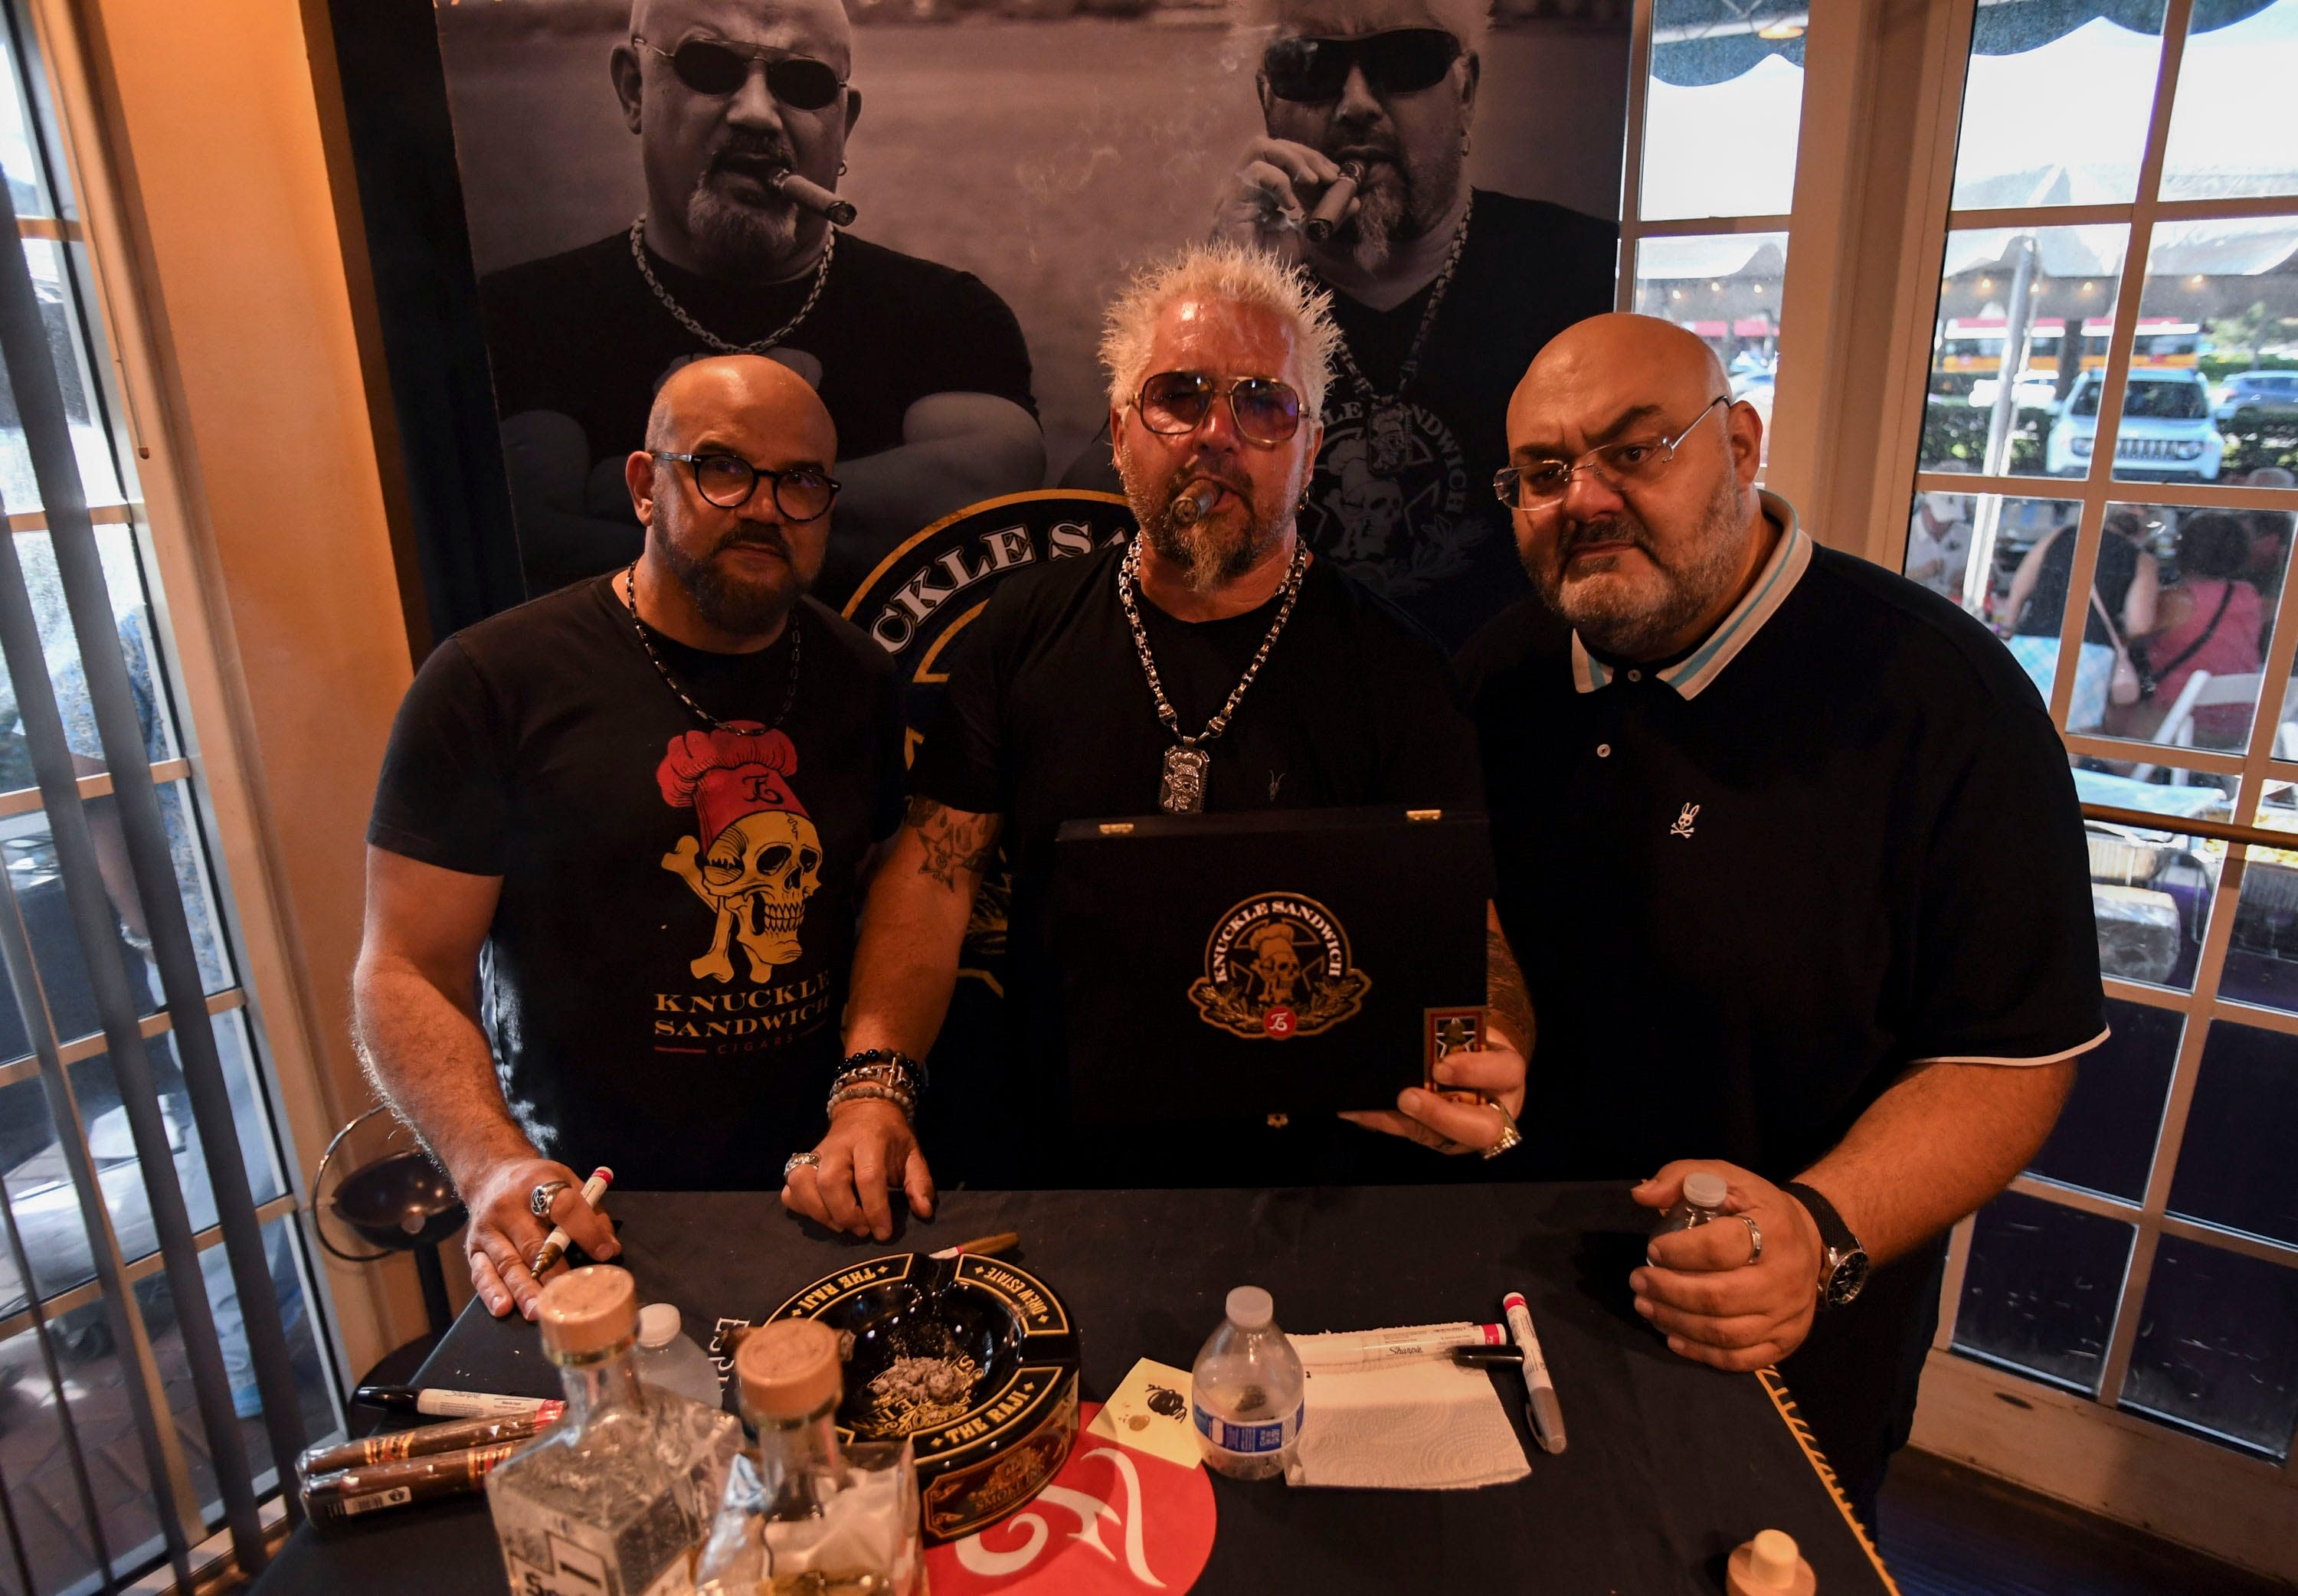 Could Guy Fieri's Food Network show help Port St. Lucie cultivate more of a civic image?